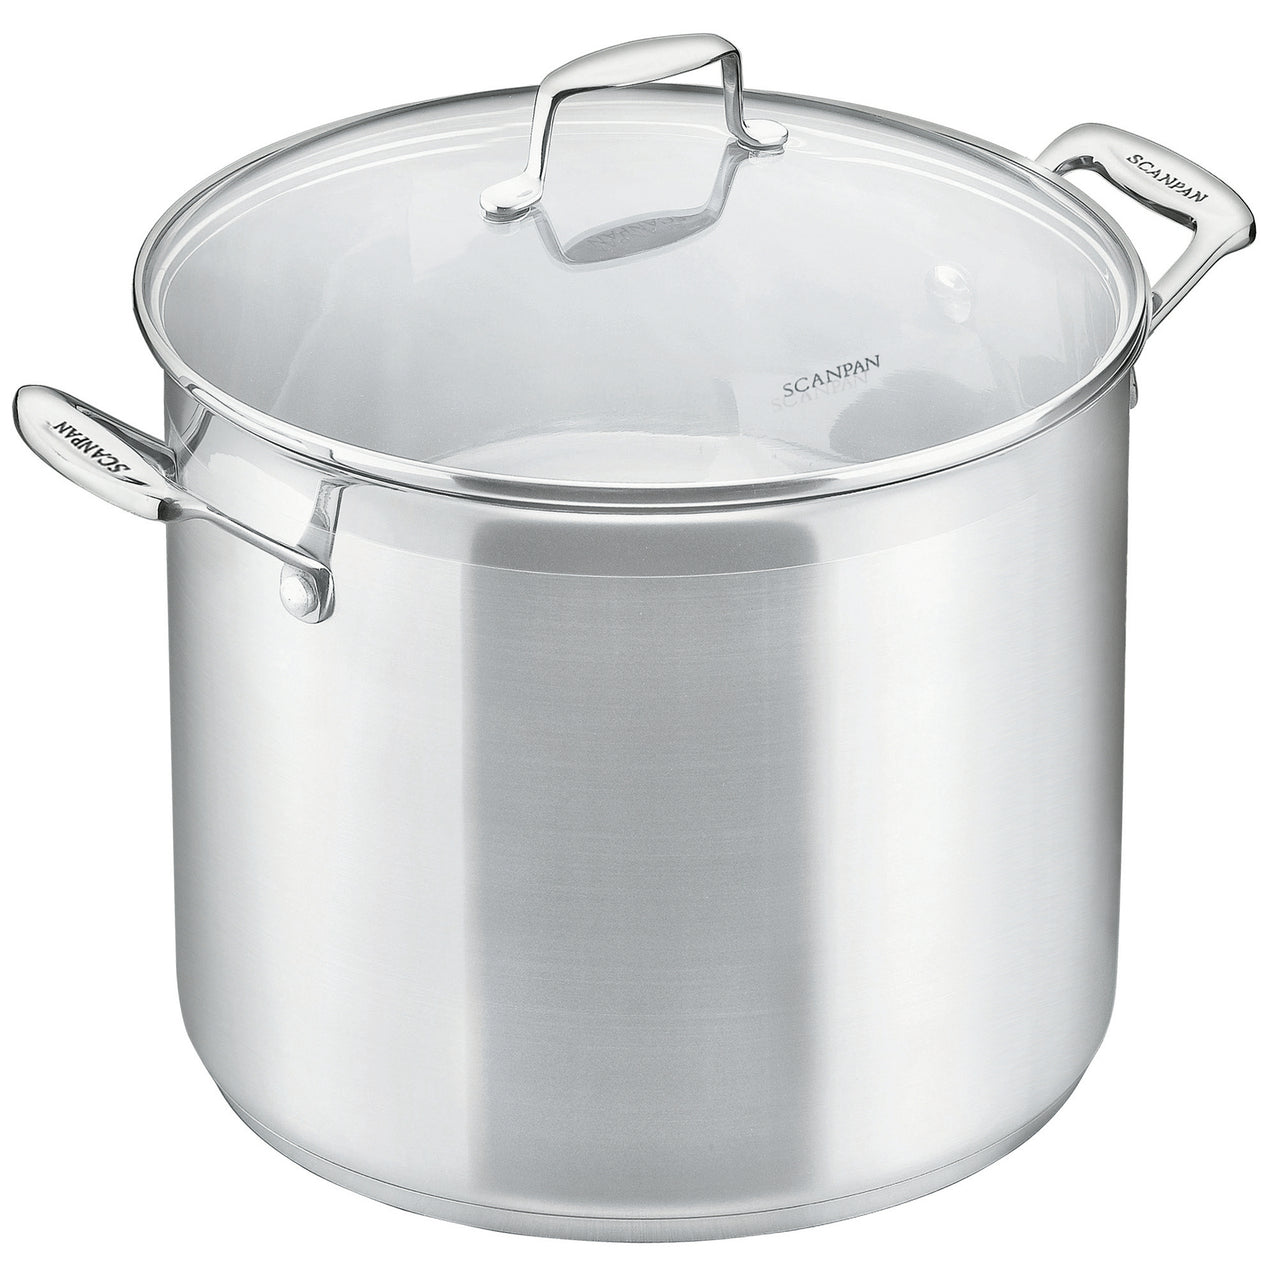 Impact 7.2L Stainless Steel Stock Pot